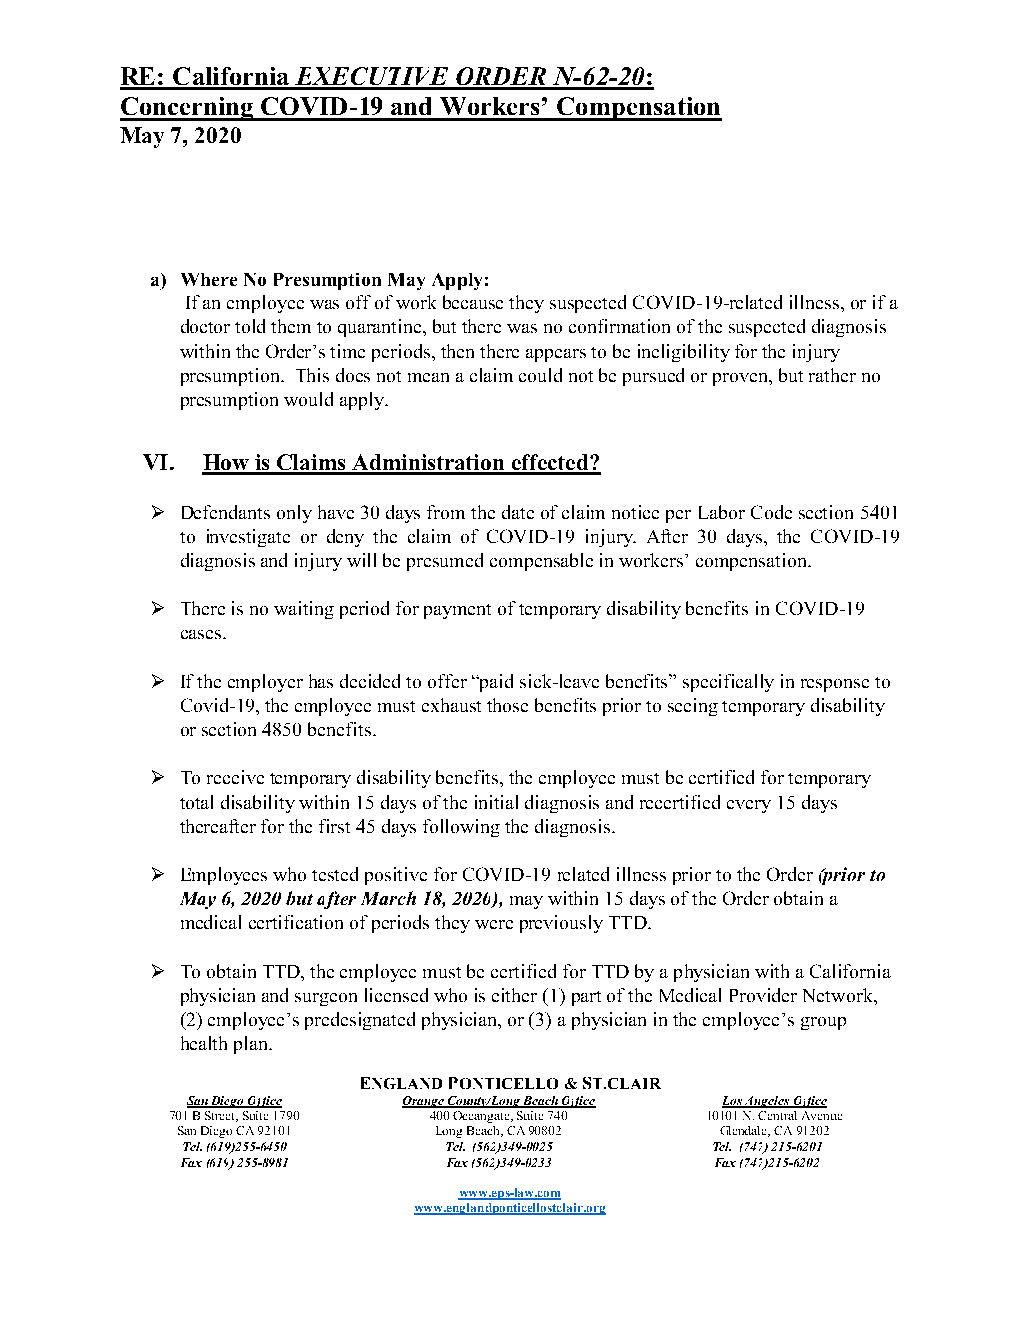 EPS Re Covid 19 Executive Order_Page4